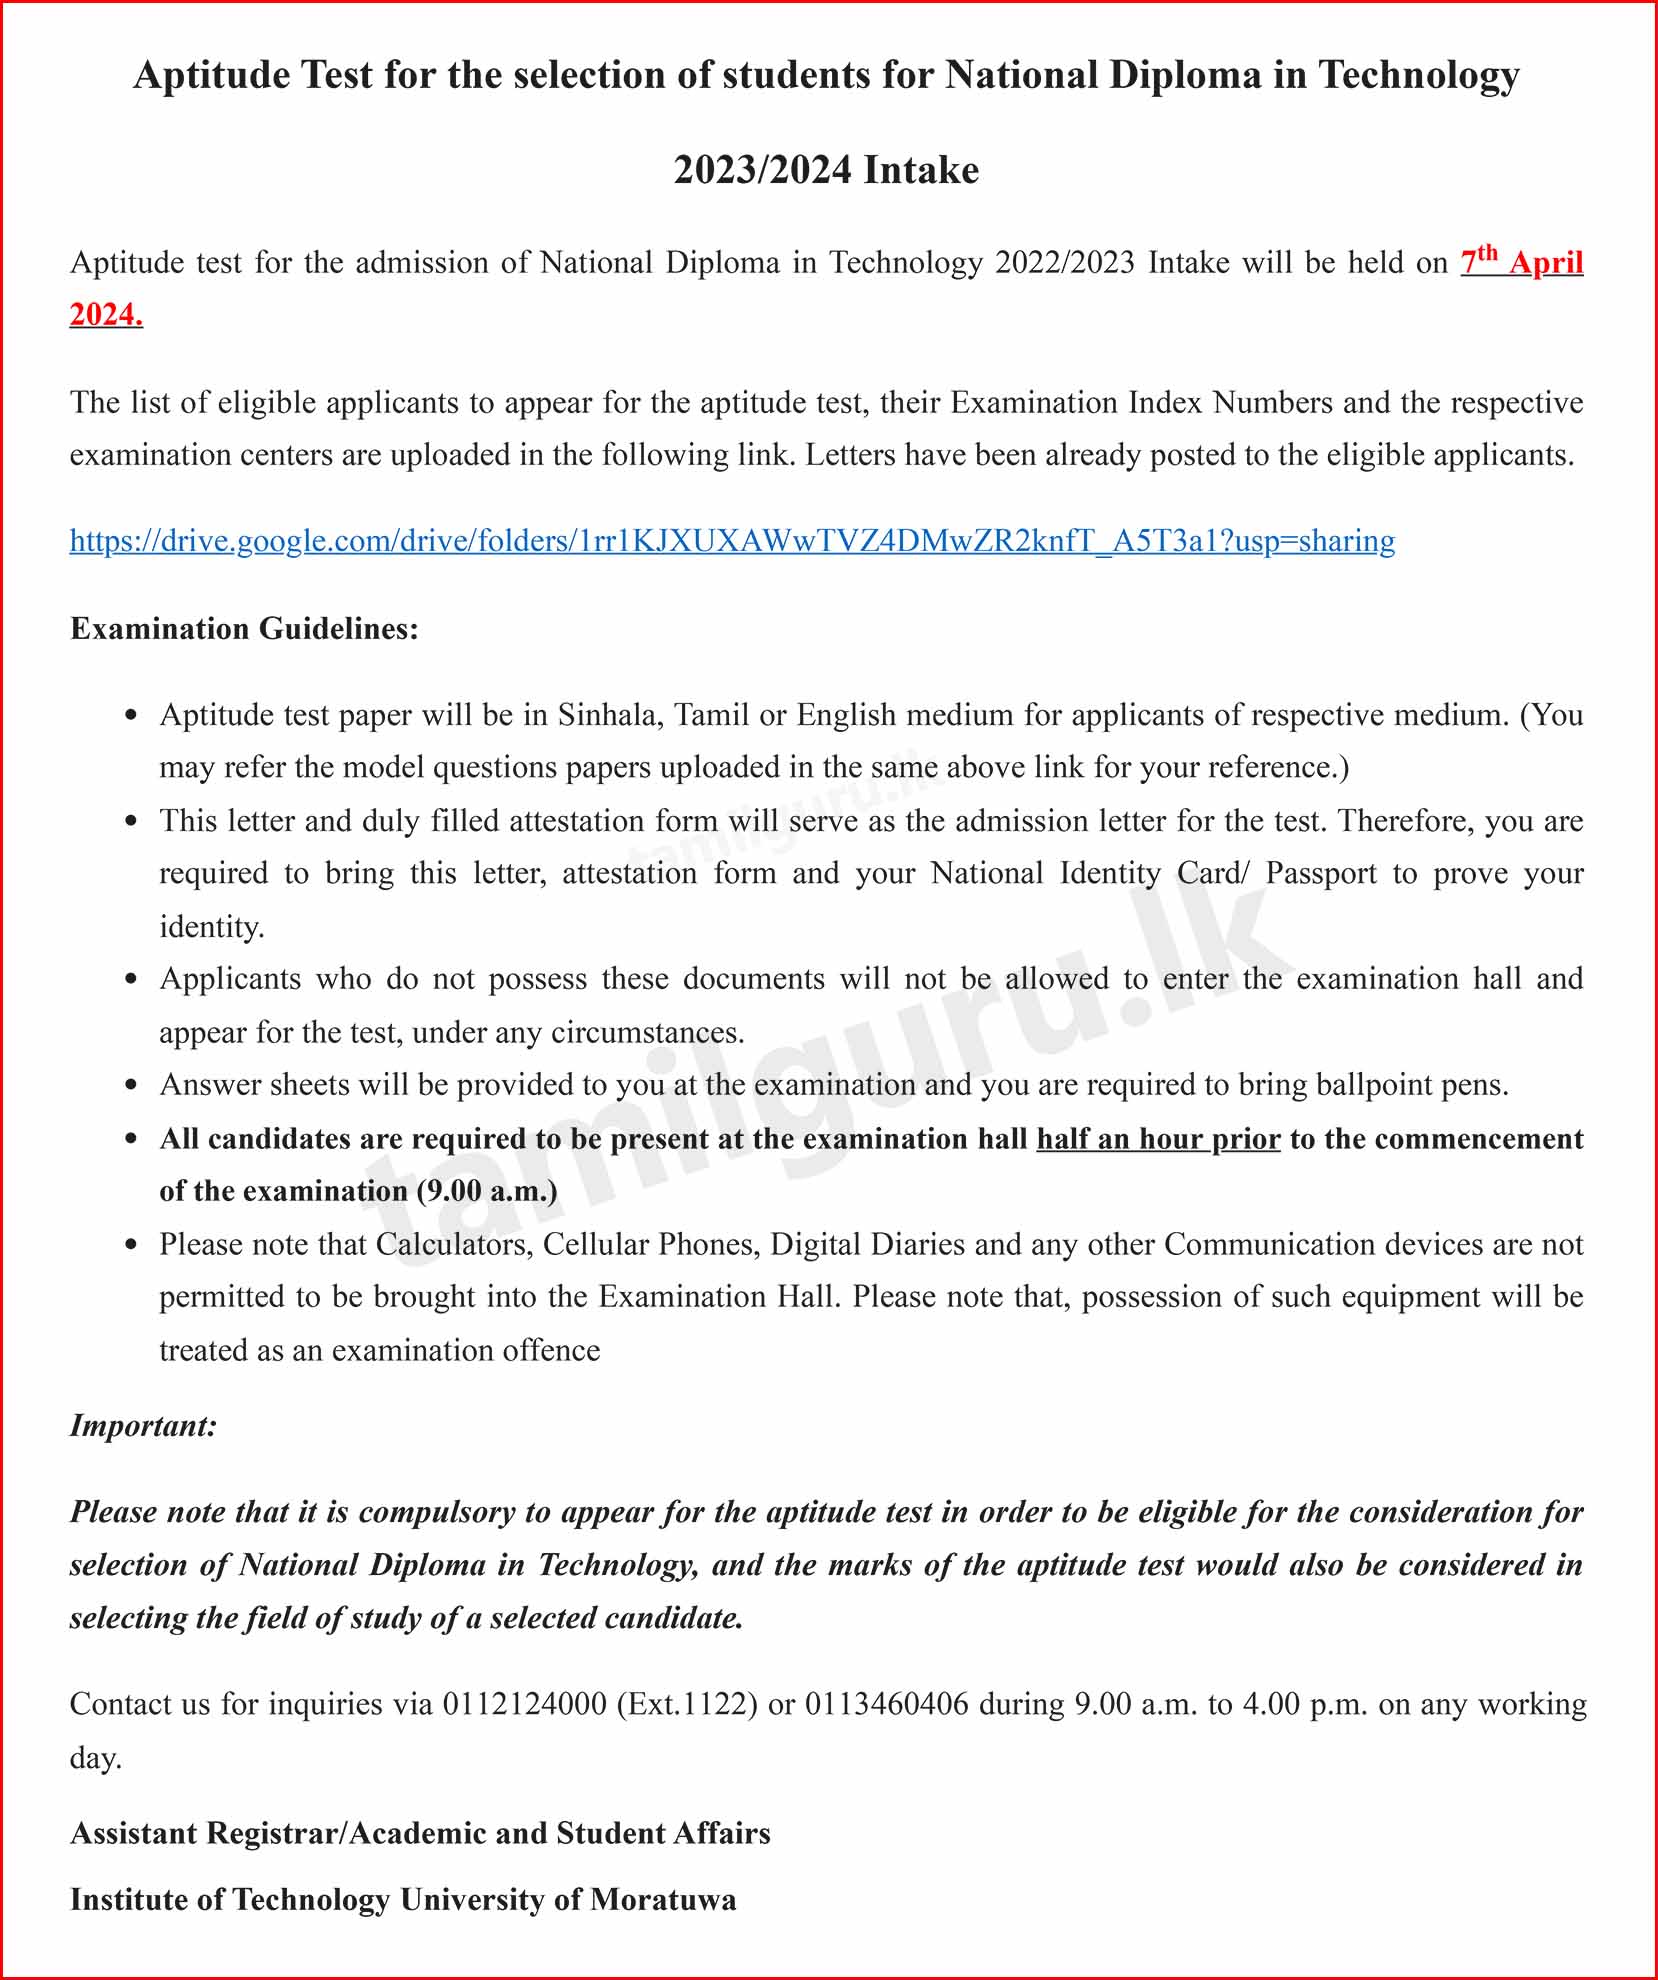 Aptitude Test Notice - Admission of  Students to National Diploma in Technology (NDT) 2023/2024 Intake at Institute of Technology University of Moratuwa (ITUM)